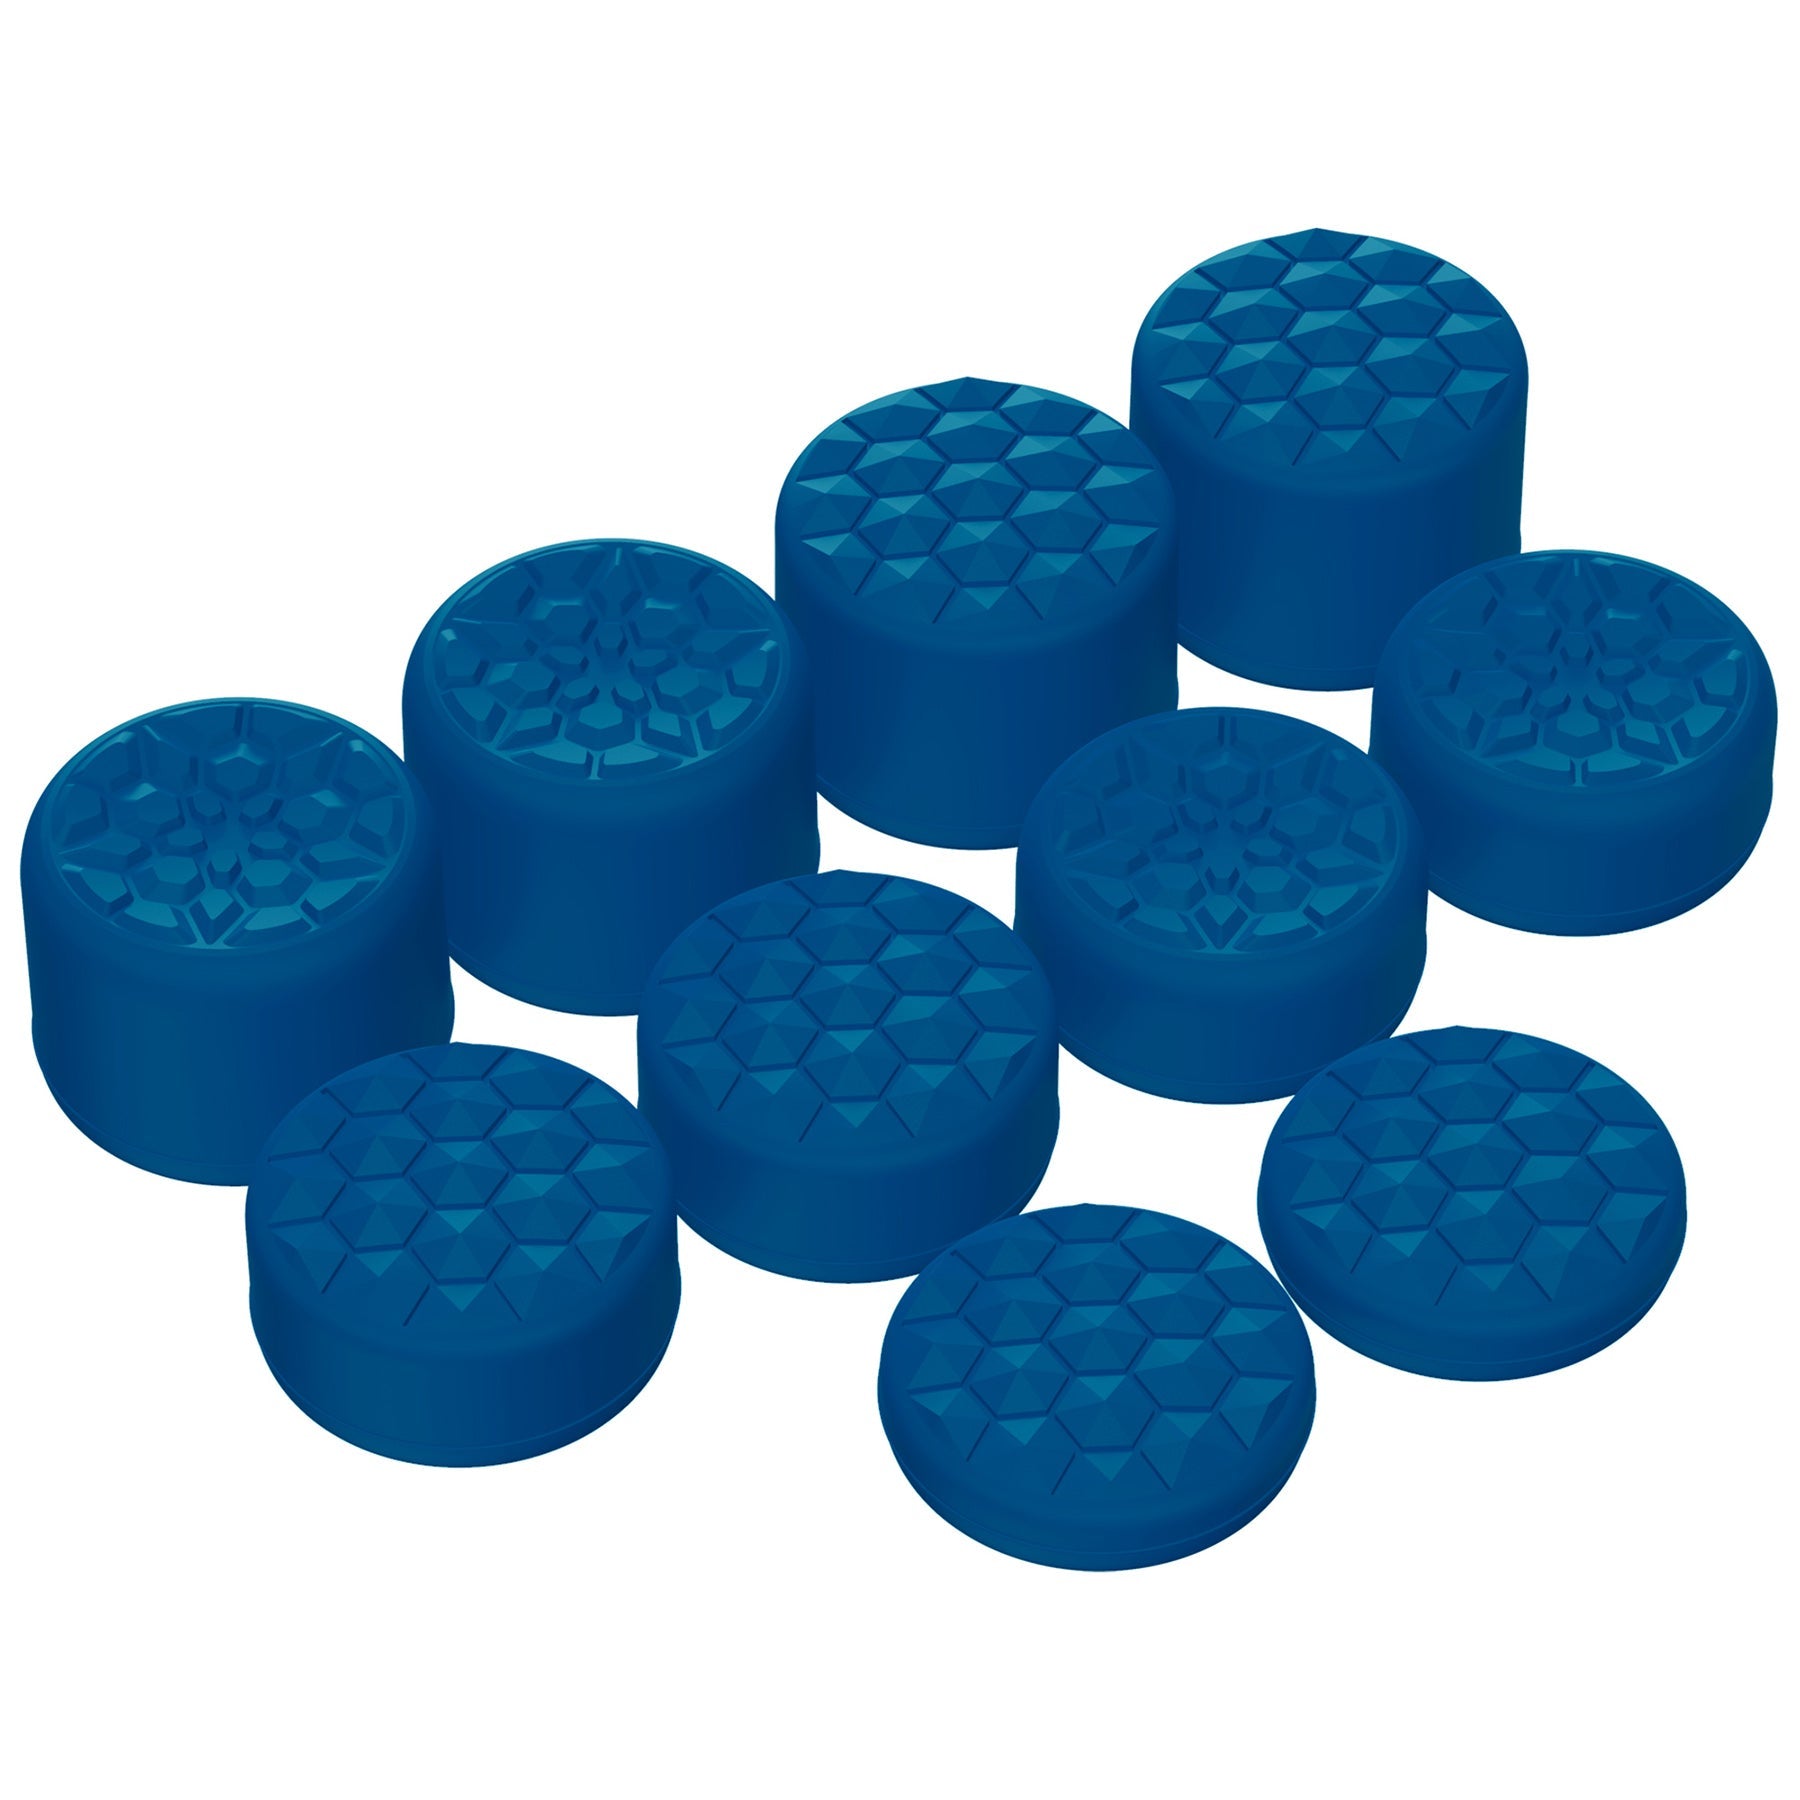 PlayVital Blue Ergonomic Stick Caps Thumb Grips for PS5, PS4, Xbox Series X/S, Xbox One, Xbox One X/S, Switch Pro Controller - with 3 Height Convex and Concave - Diamond Grain & Crack Bomb Design - PJM2016 PlayVital